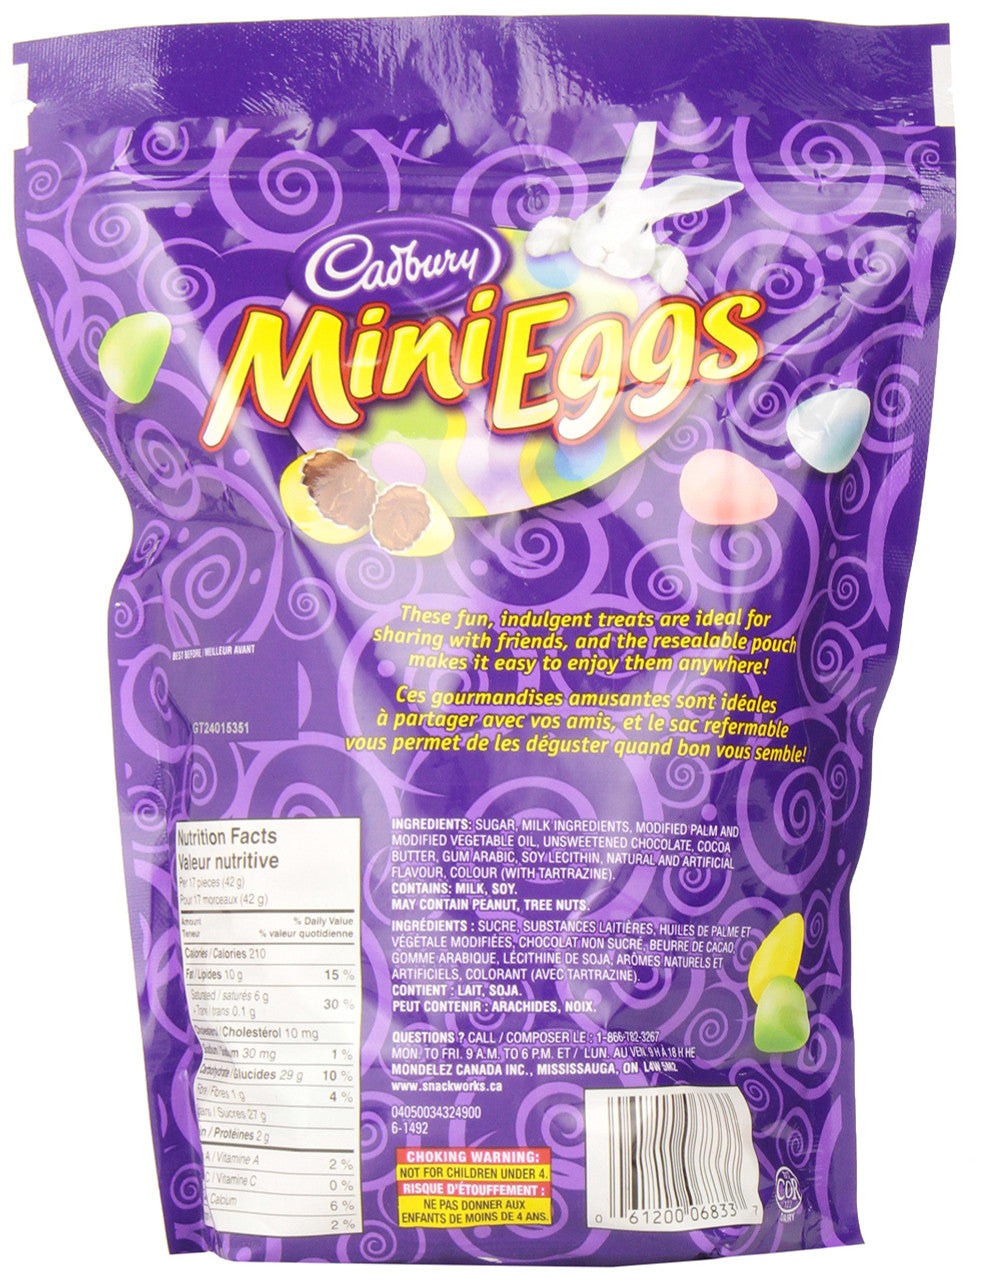 Cadbury Mini Egg Pouch Chocolate, 943g/33.3 oz. {Imported from Canada}